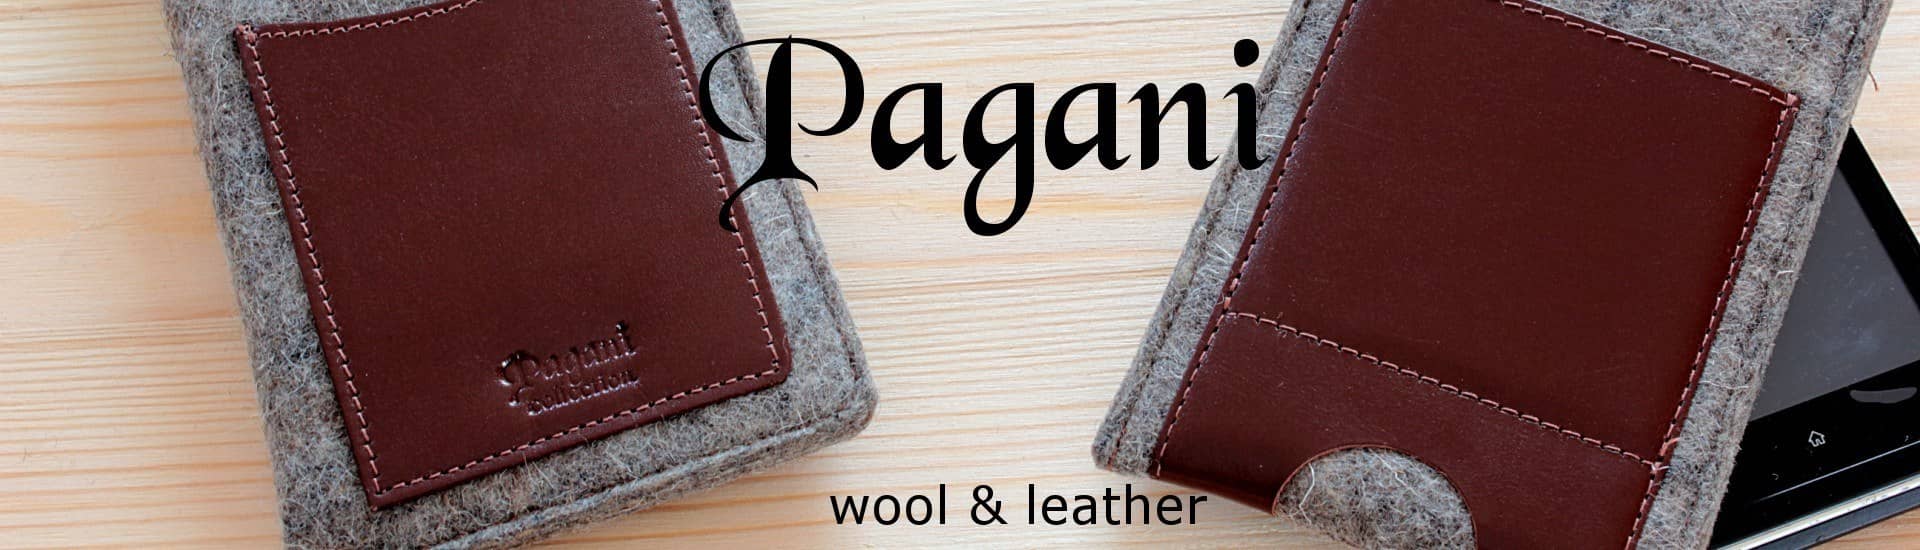  Pagani collection - wool & leather